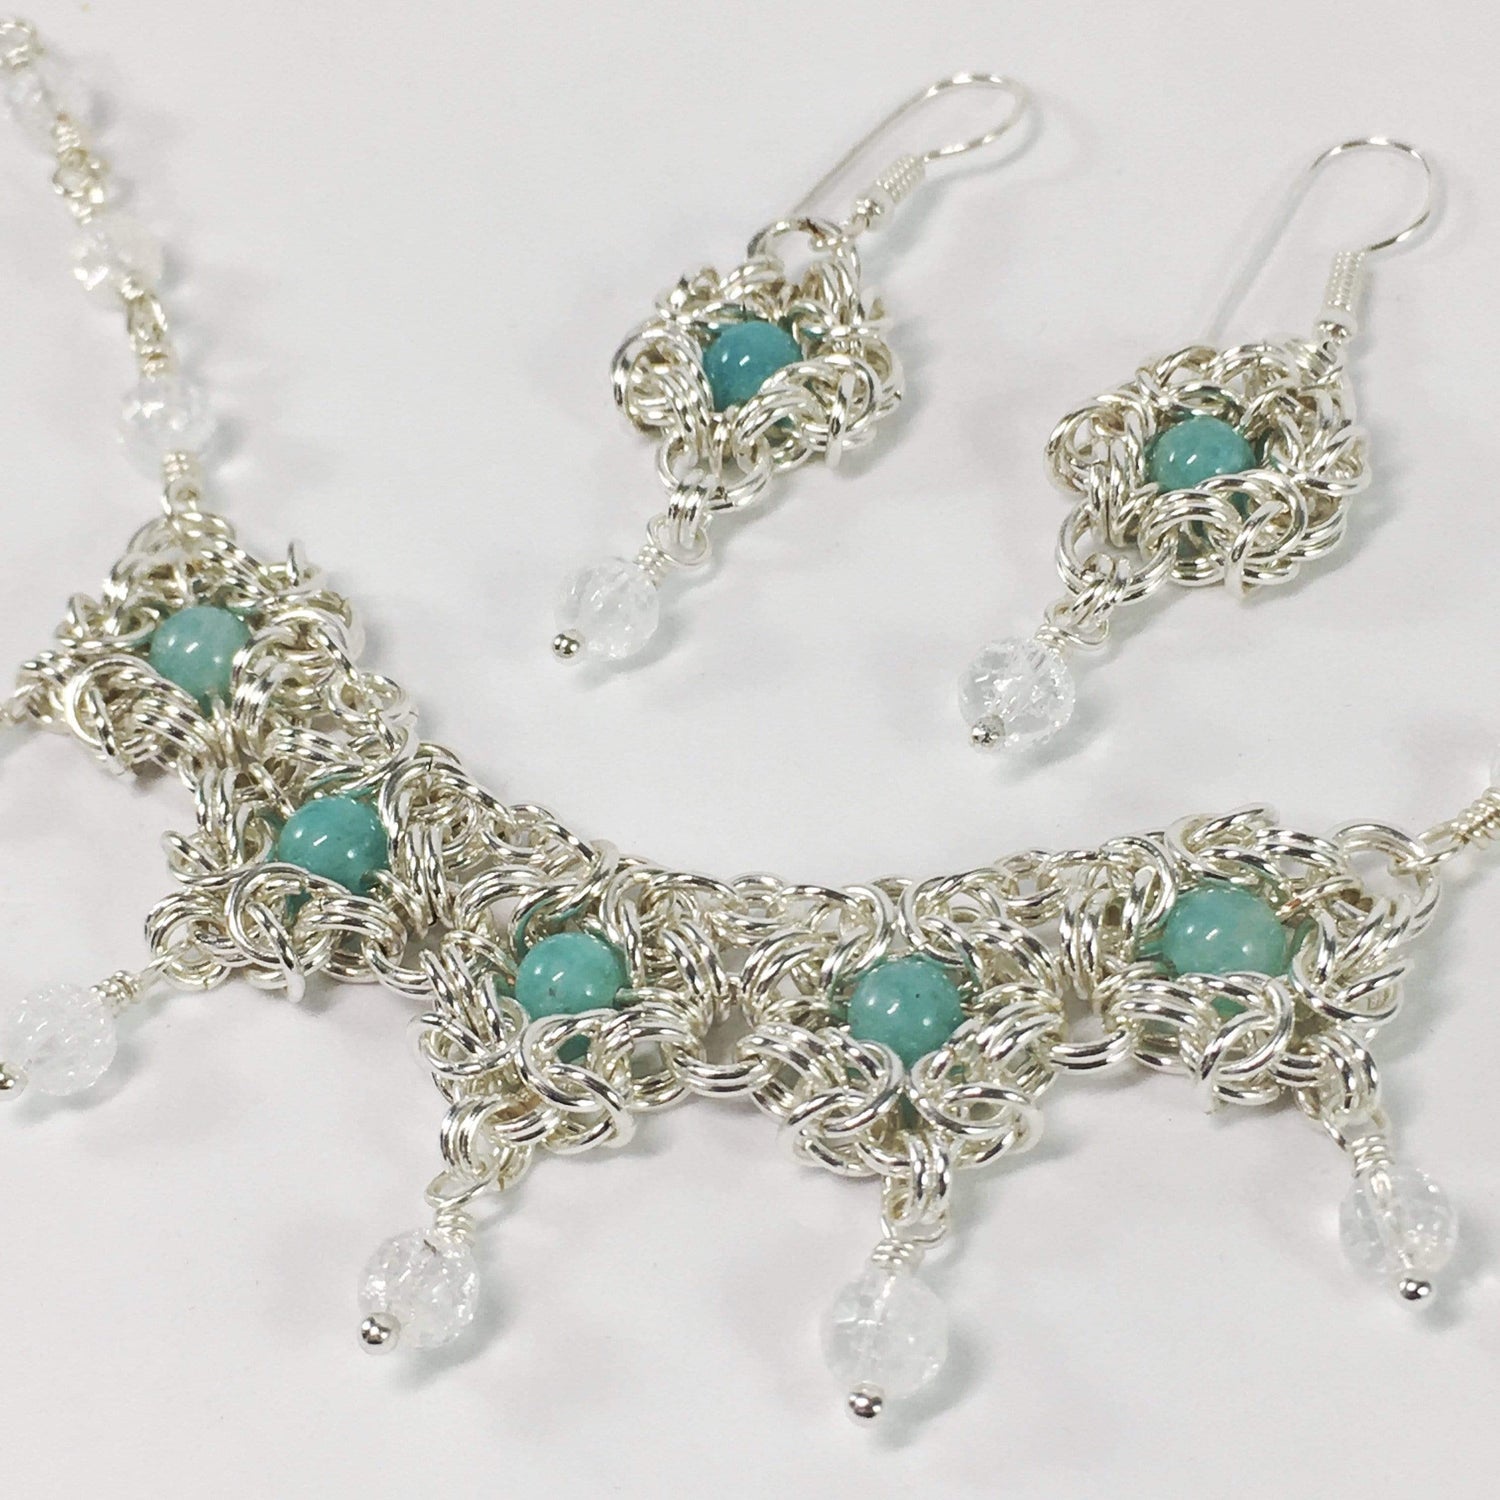 Handmade Chainmaille Neckace With Amazonite And Clear Quartz Gemstones By Jewelz Galore 